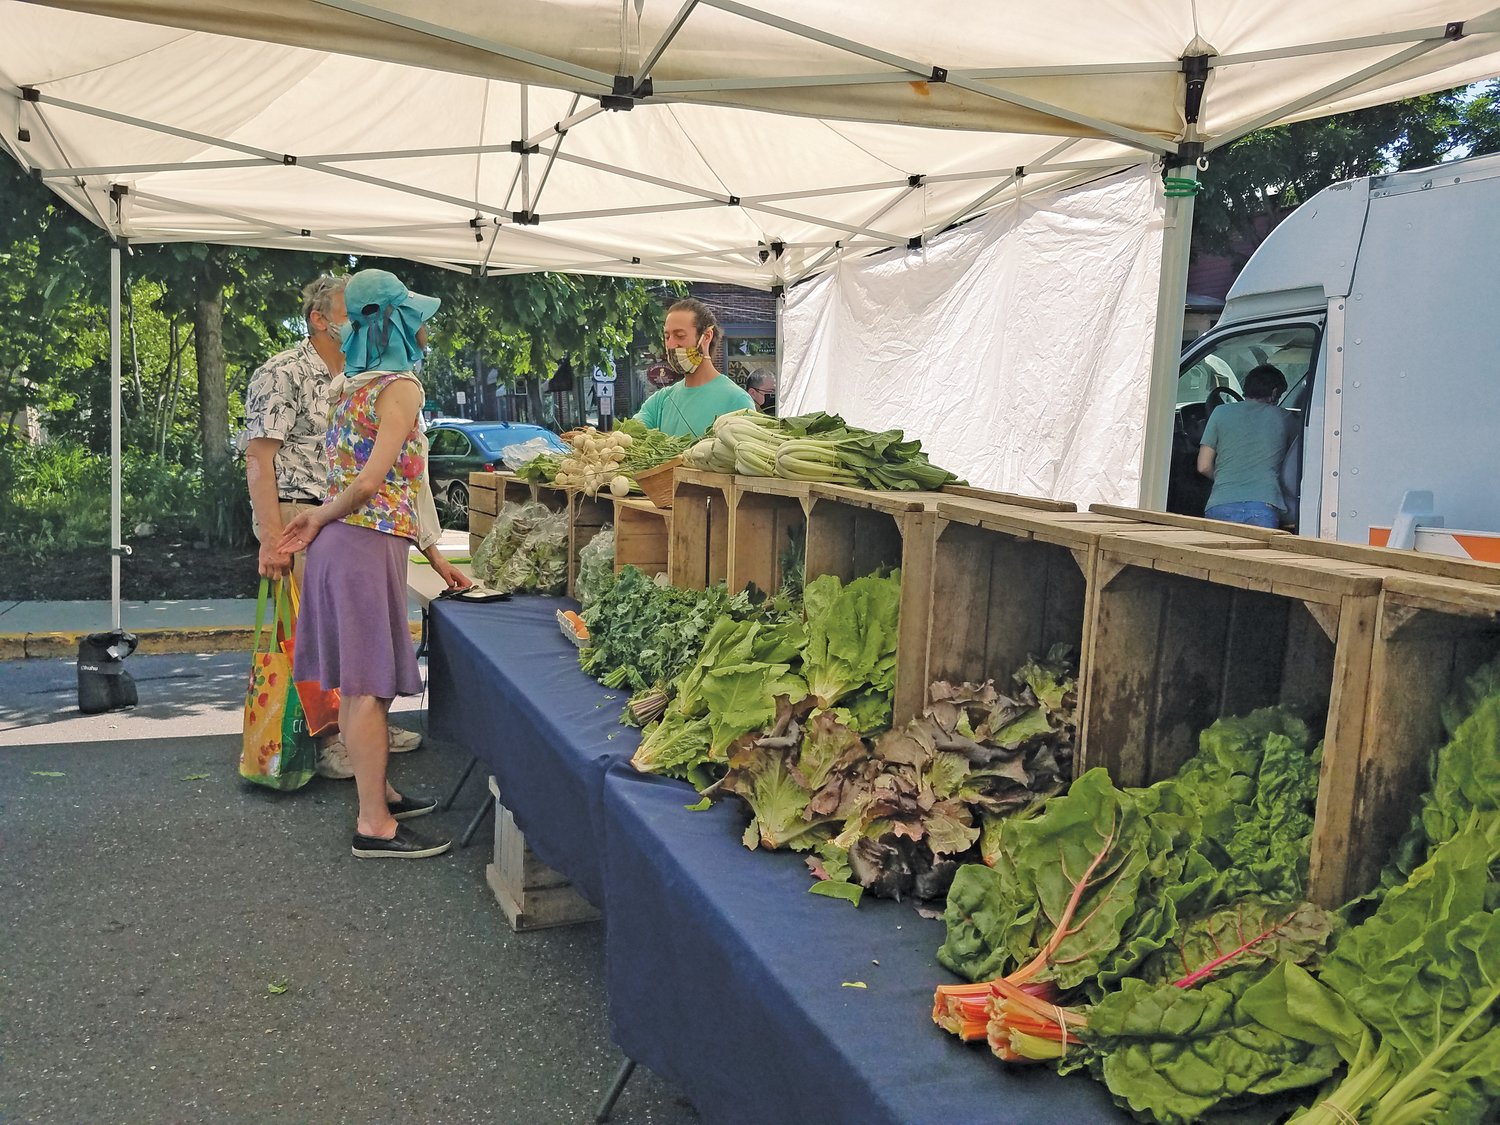 Fresh greens ranging from spinach to Swiss chard to lettuces were an impressive array at the Love Grows CSA stand at last Saturday’s Doylestown Farmers Market.